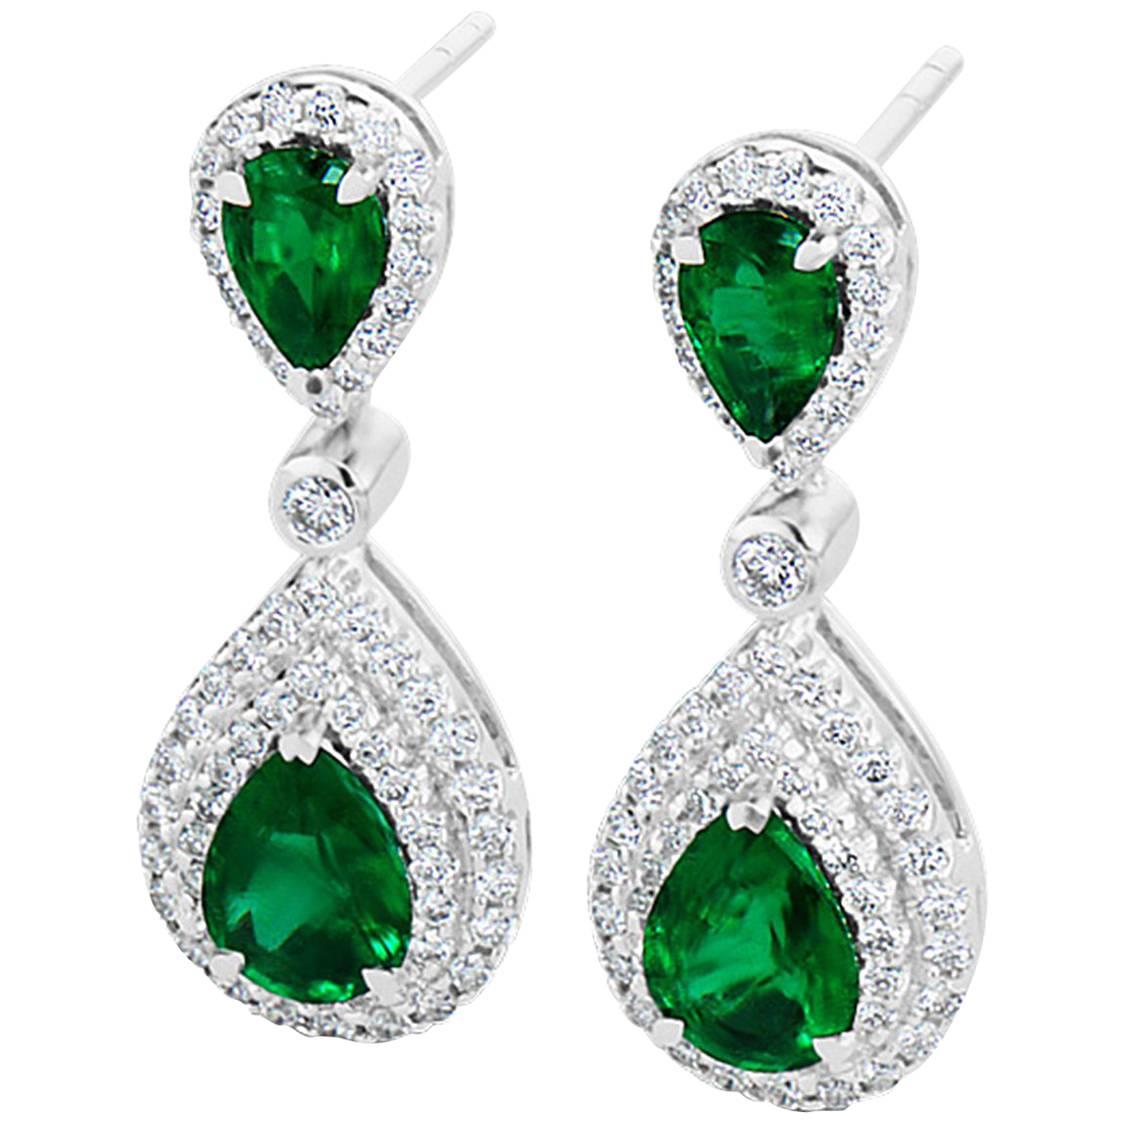 2.04 Carat Total Emerald and Diamond 18K White Gold Earrings For Sale